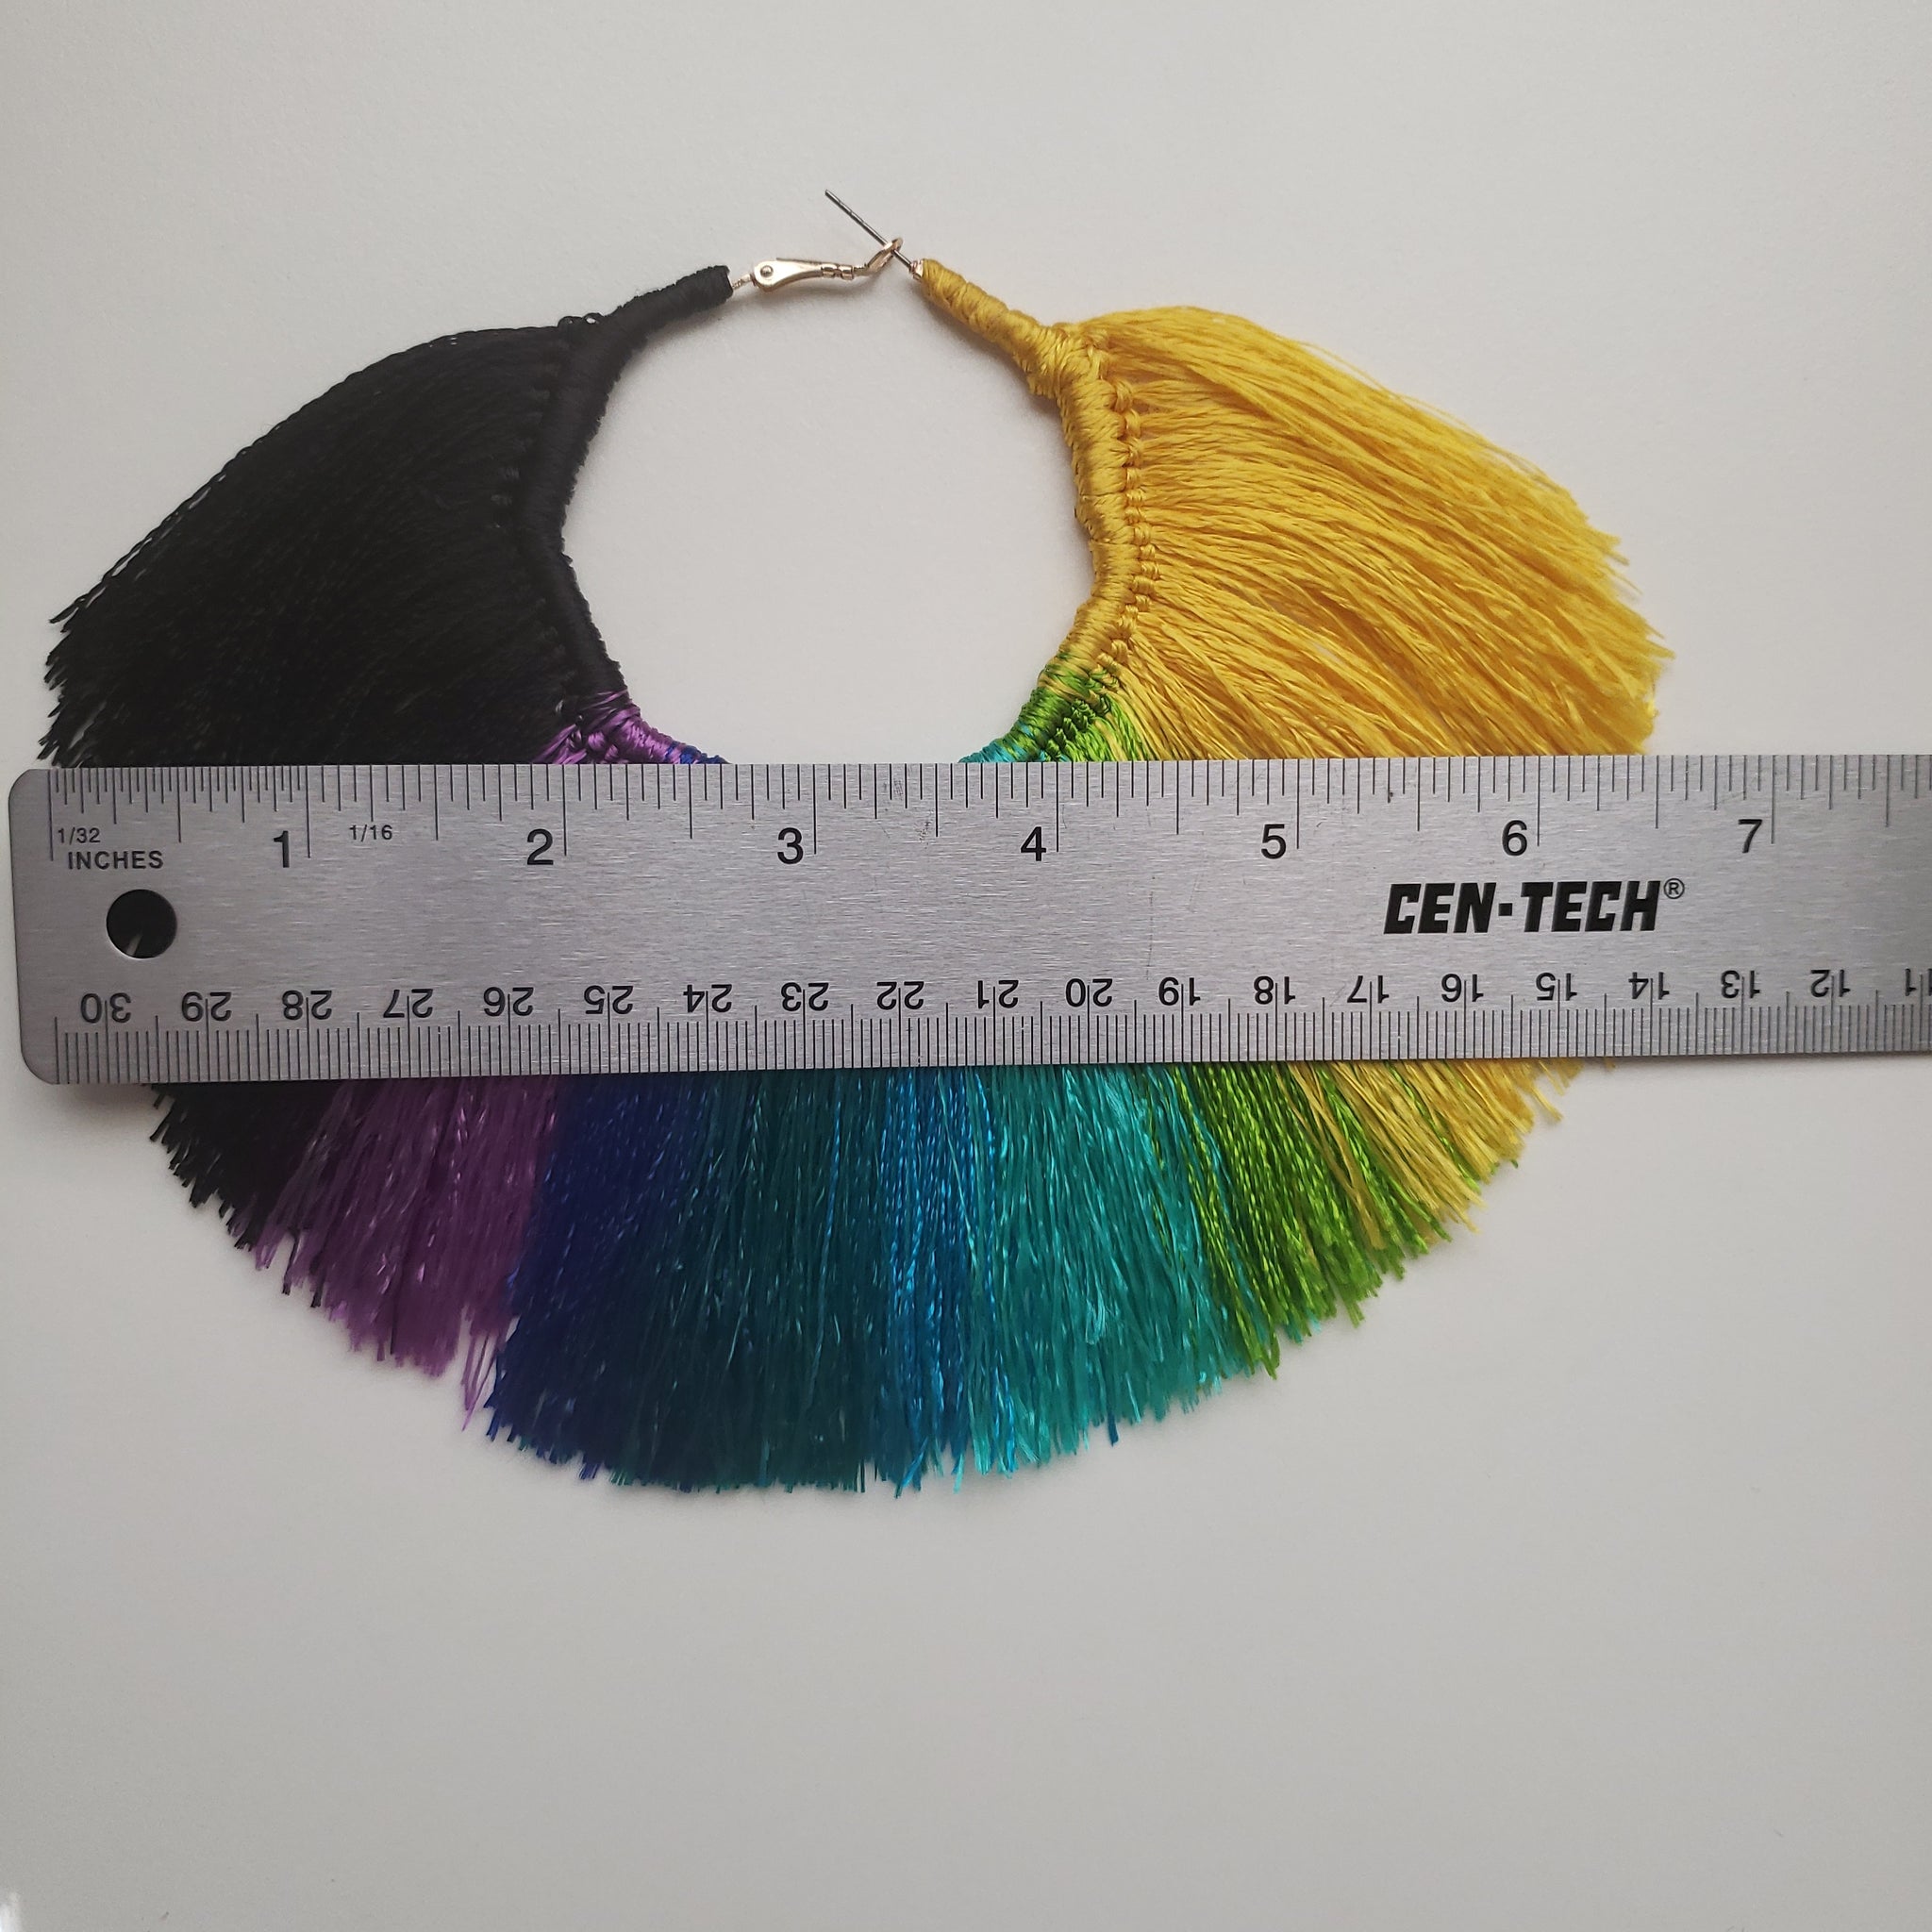 Fan shaped Multi-Colored Tassel Hoop earrings that are yellow, green, blue, purple, and black. Width measurement is 6.5 inches.